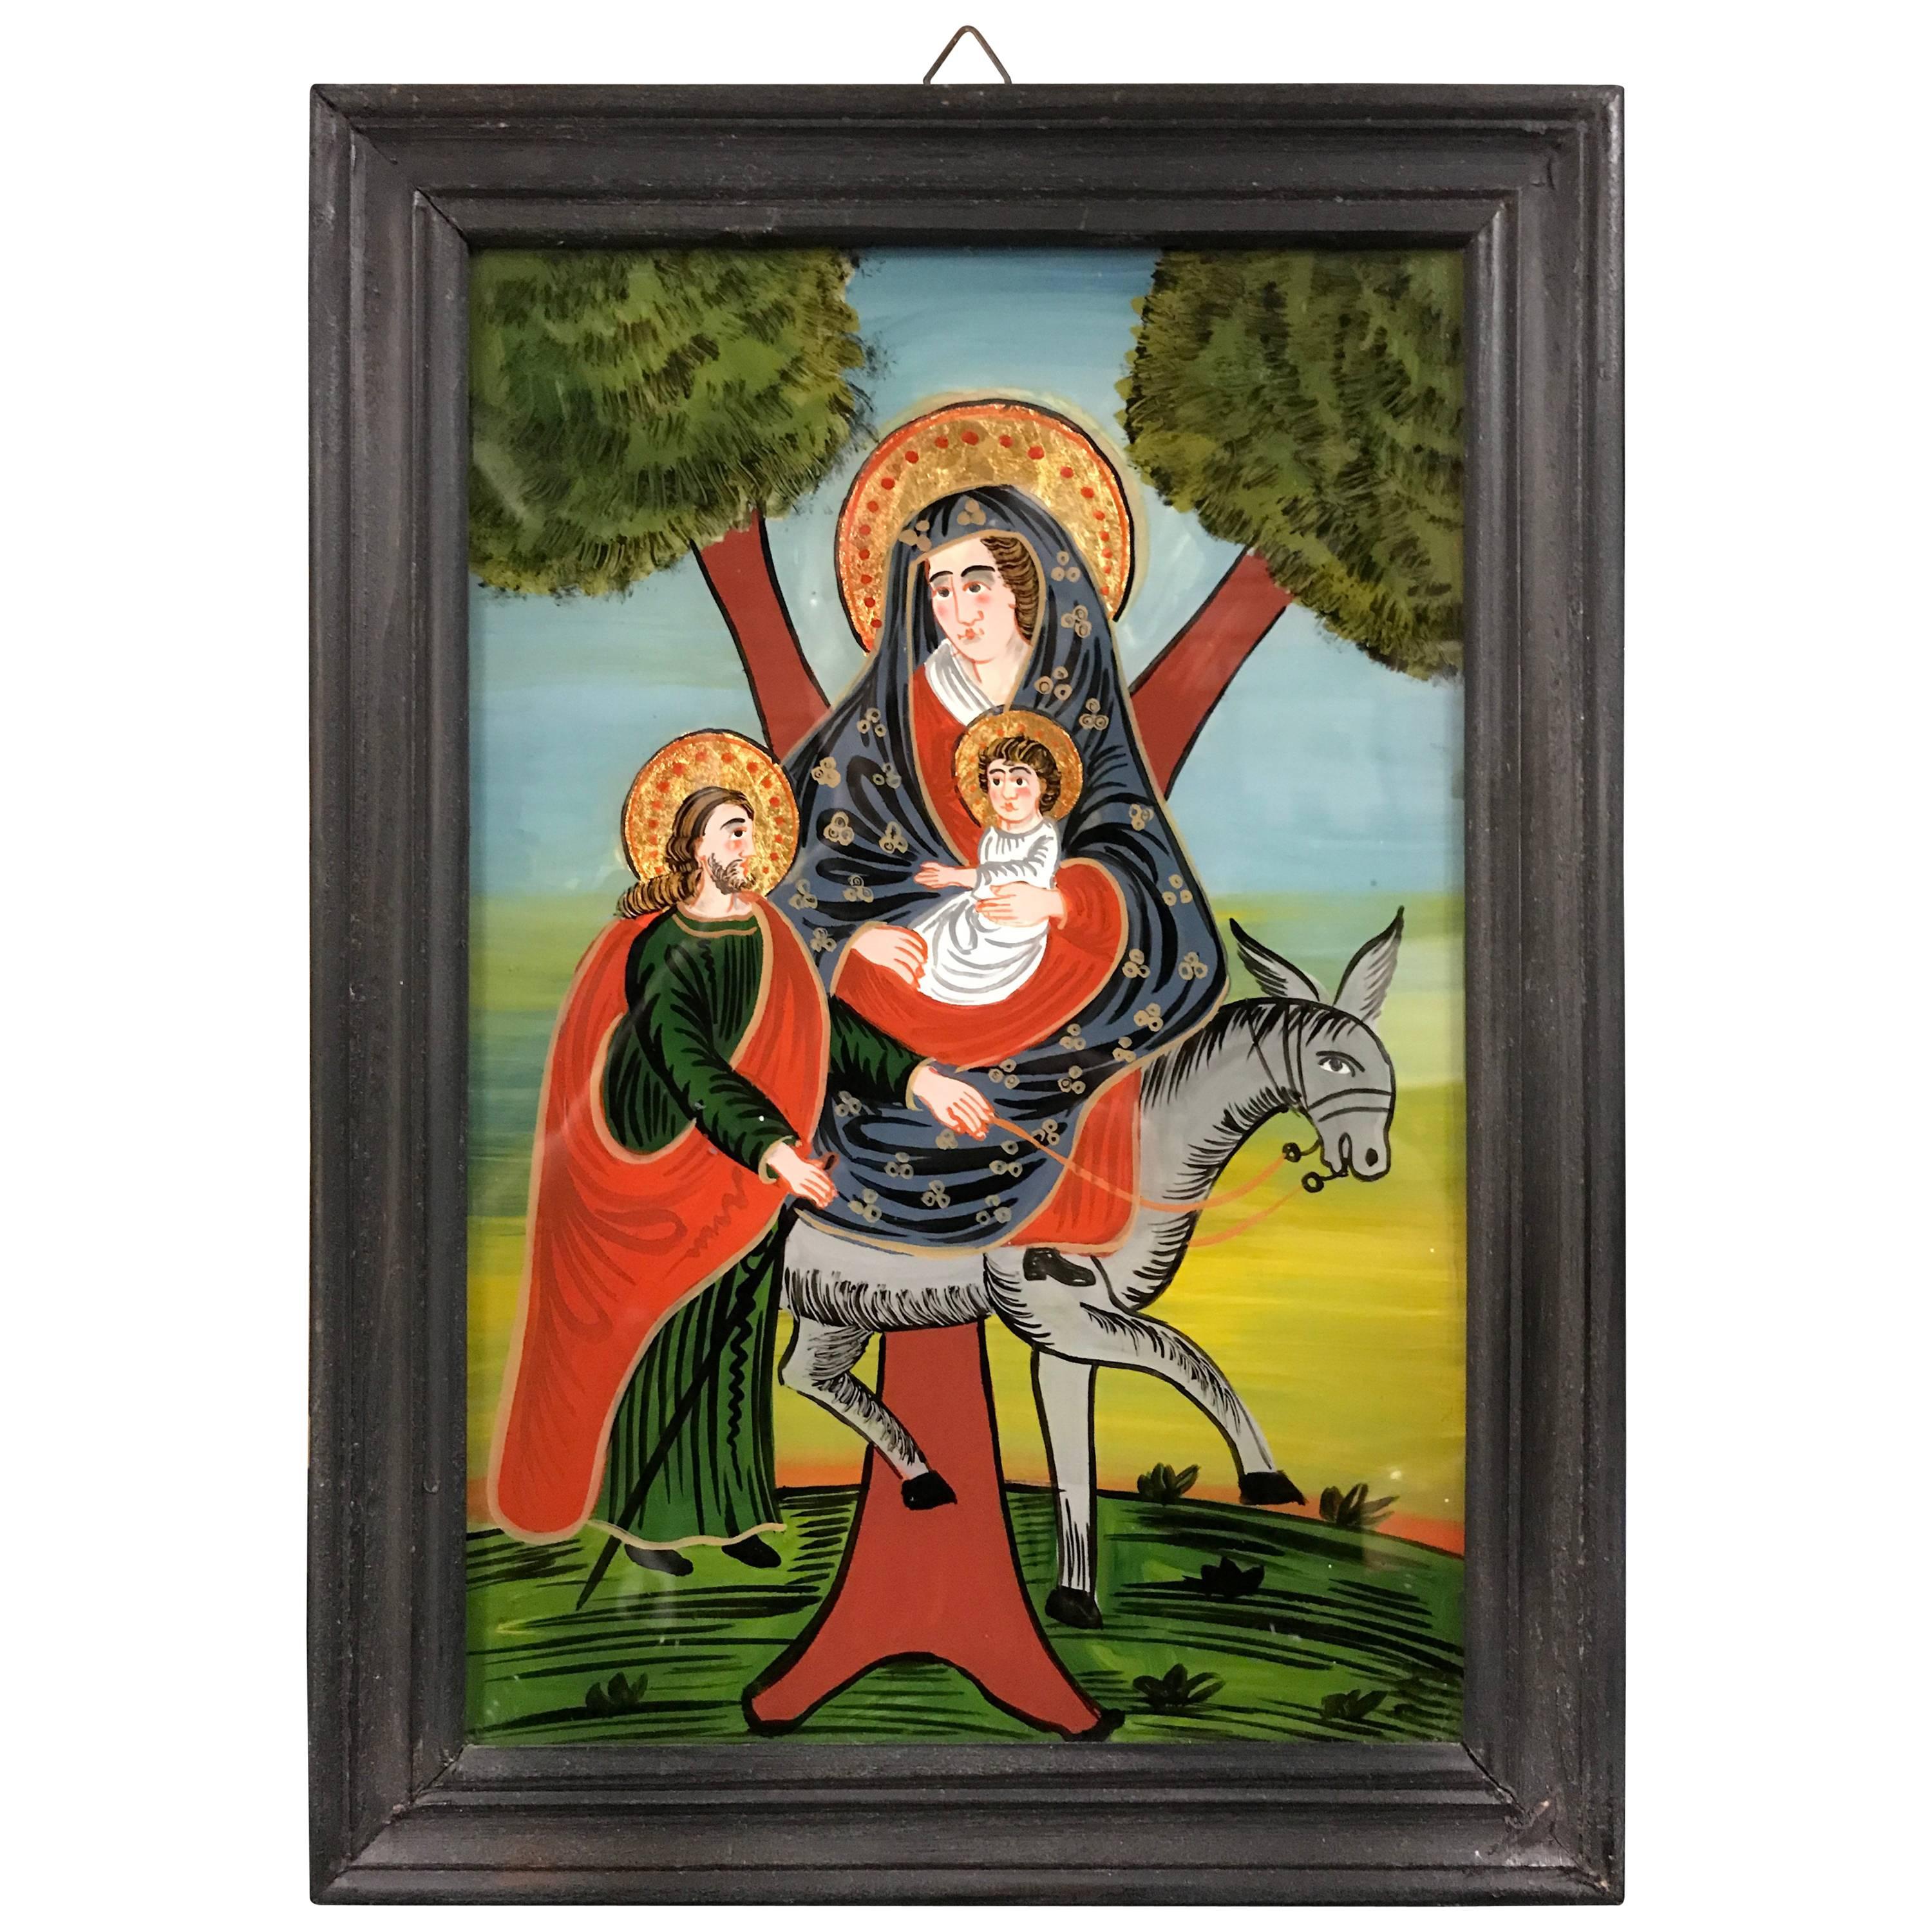 19th Century Reverse Glass Painting of The Holy Family, "The Flight to Egypt"